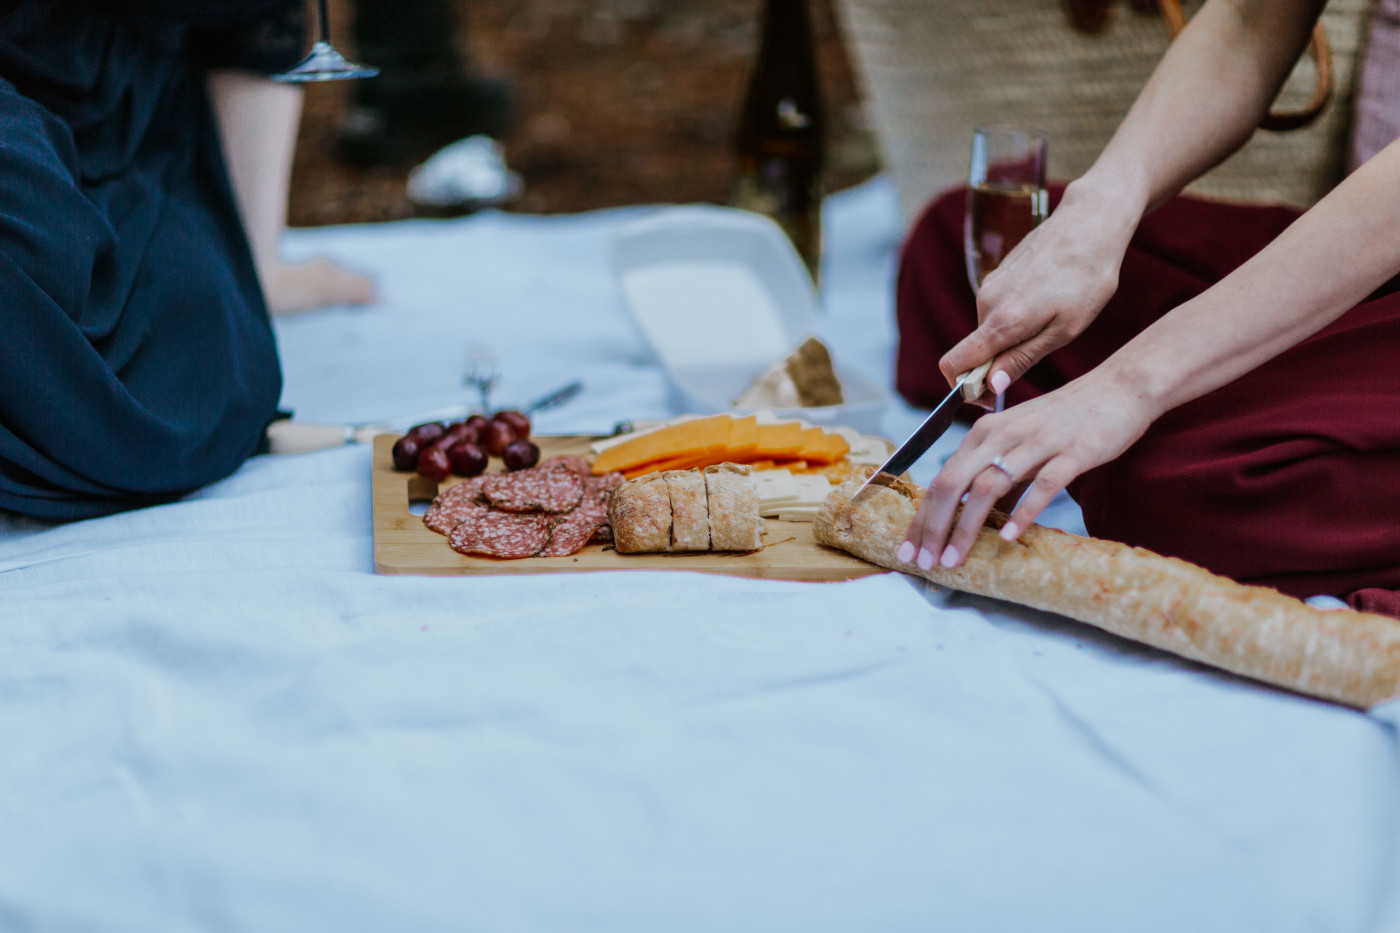 Tiffany and Hayley cut bread. Elopement photography at the Columbia River Gorge by Sienna Plus Josh.